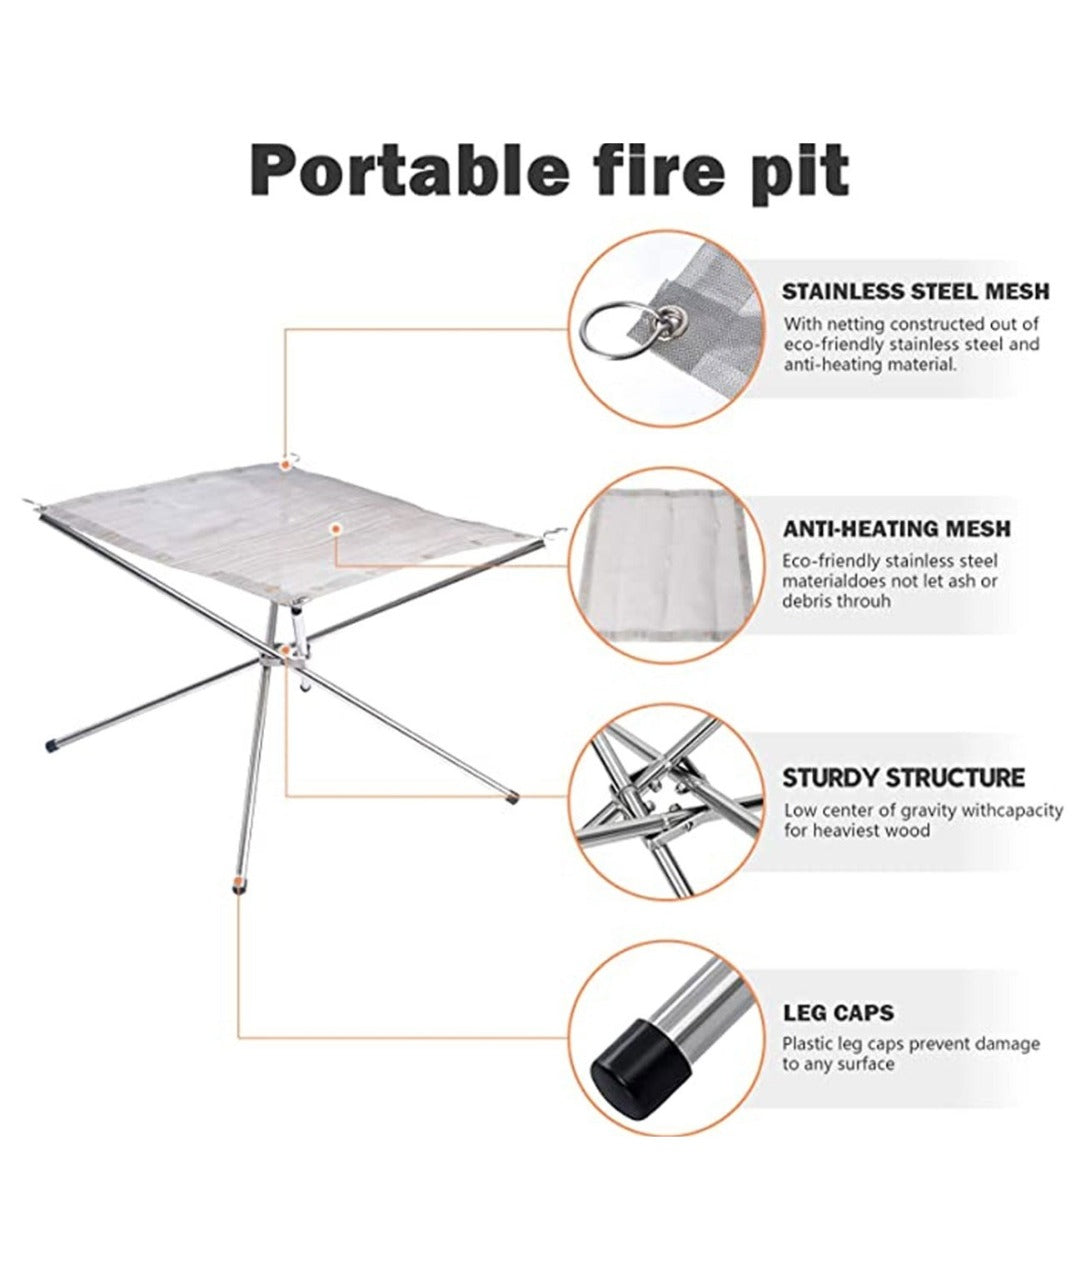 Portable Outdoor Fire Pit 16 Inch Upgrade Foldable Stainless Steel Mesh Fire Pit Wood Burning, Collapsible Fireplace Space Saving Perfect for Camping, Backyard, Patio, Garden (Carrying Bag Included)